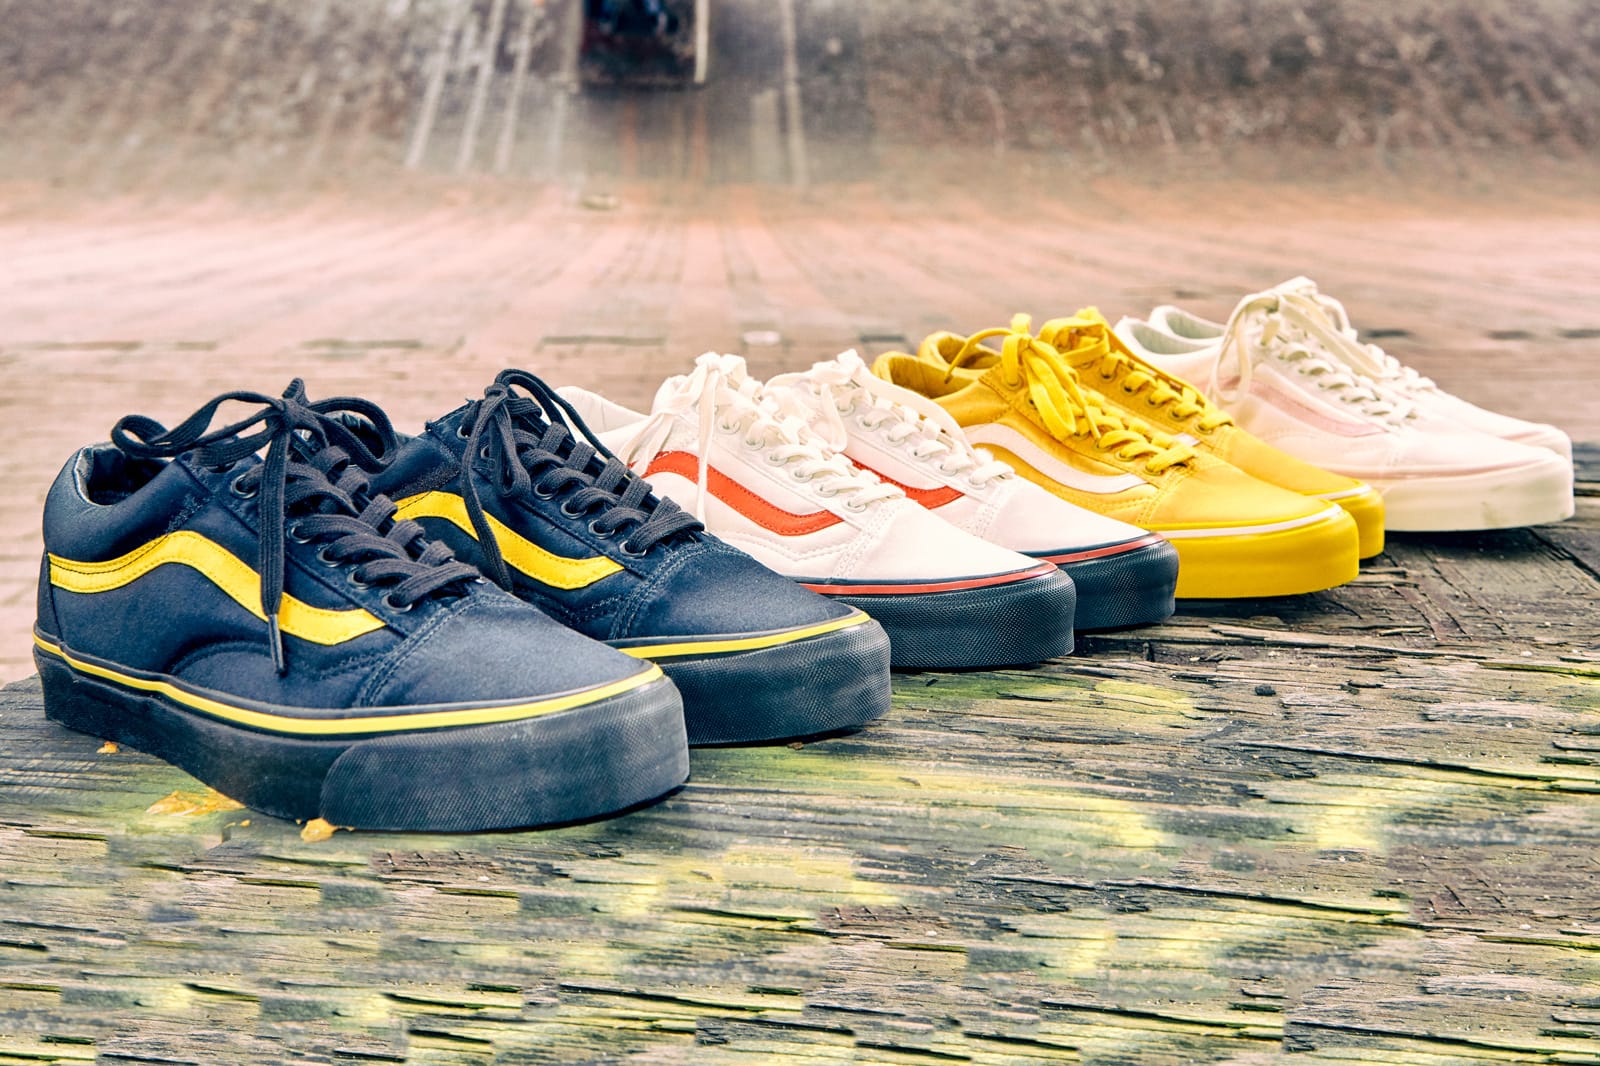 Vans for Opening Ceremony Satin Pack 